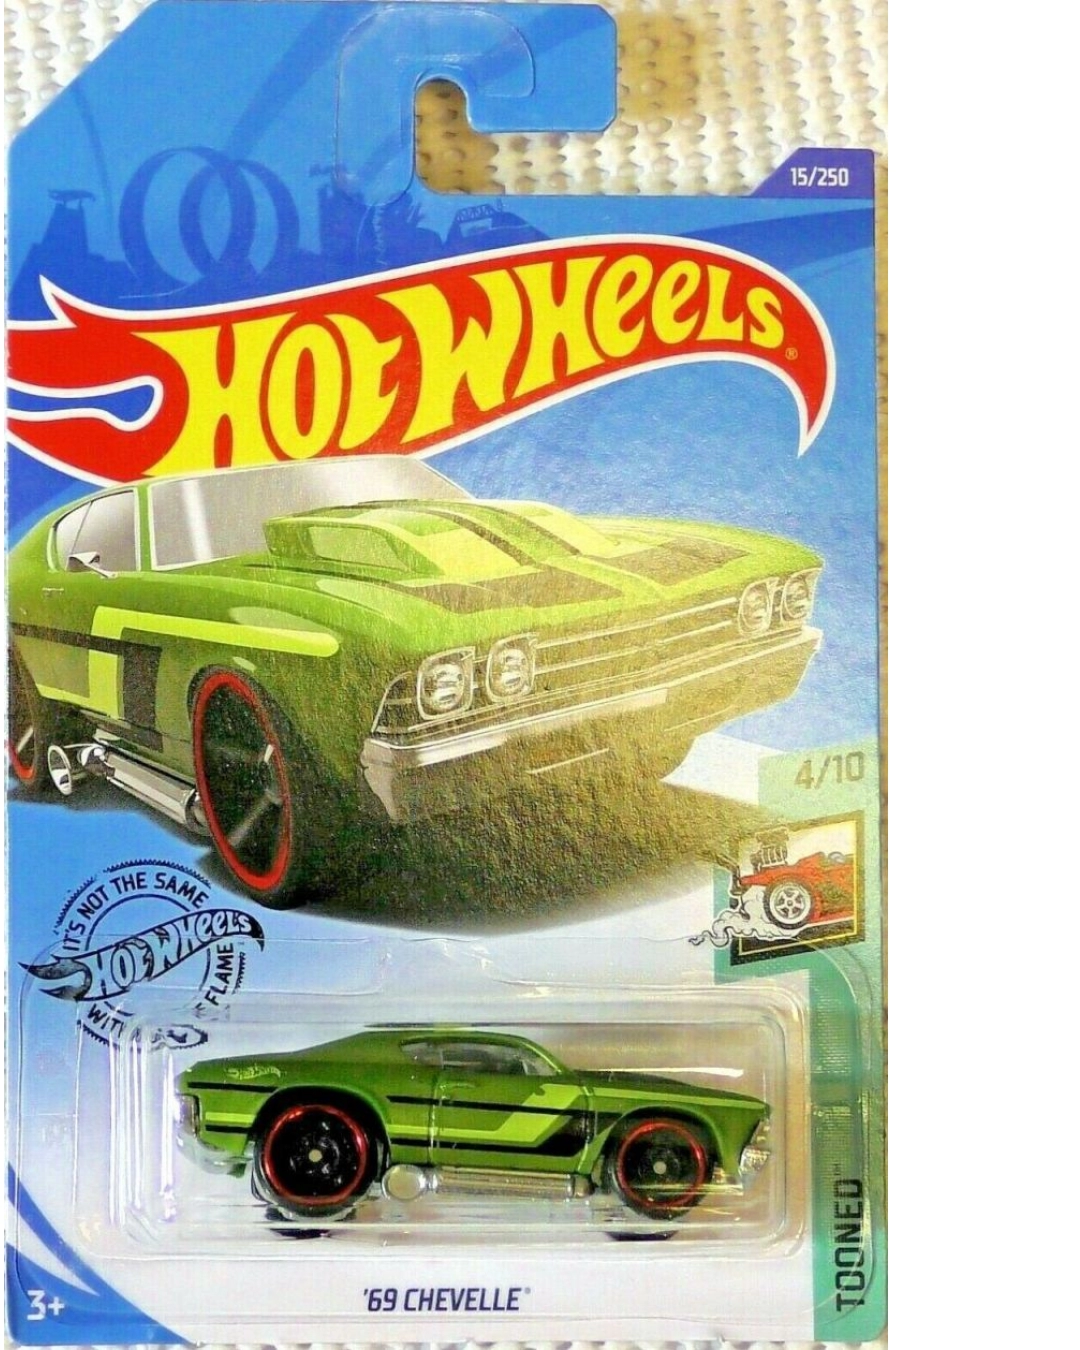 2020 Hot Wheels '69 CHEVELLE 4/10 TOONED Series 15/250 